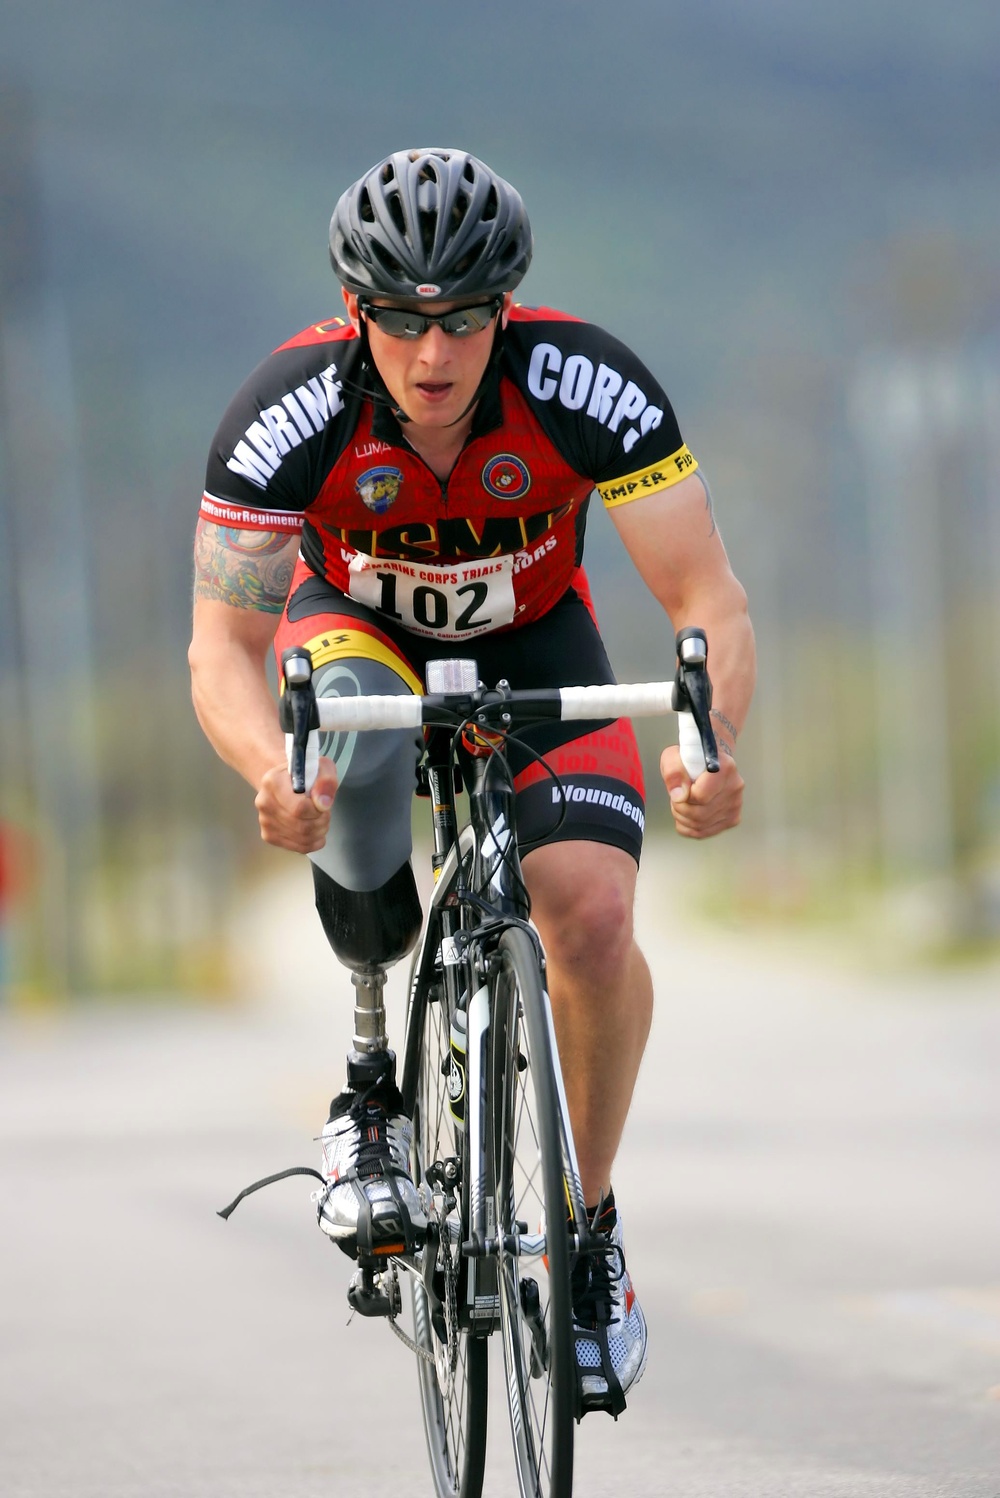 2013 Marine Corps Trials cycling